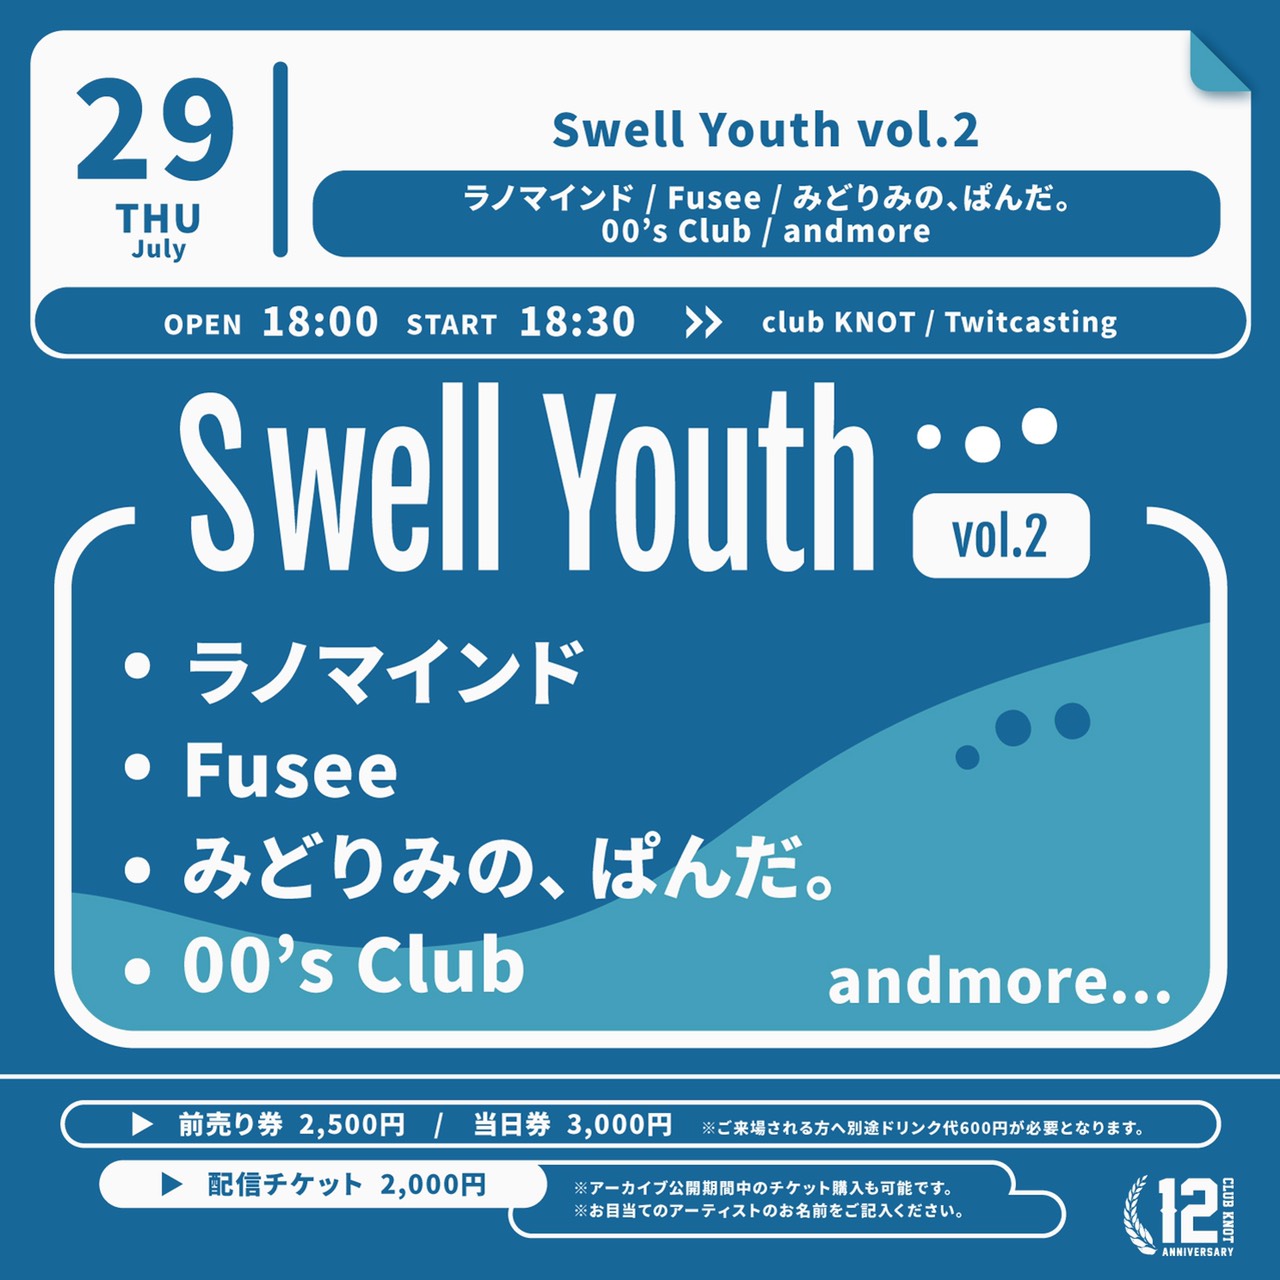 Swell Youth vol.2